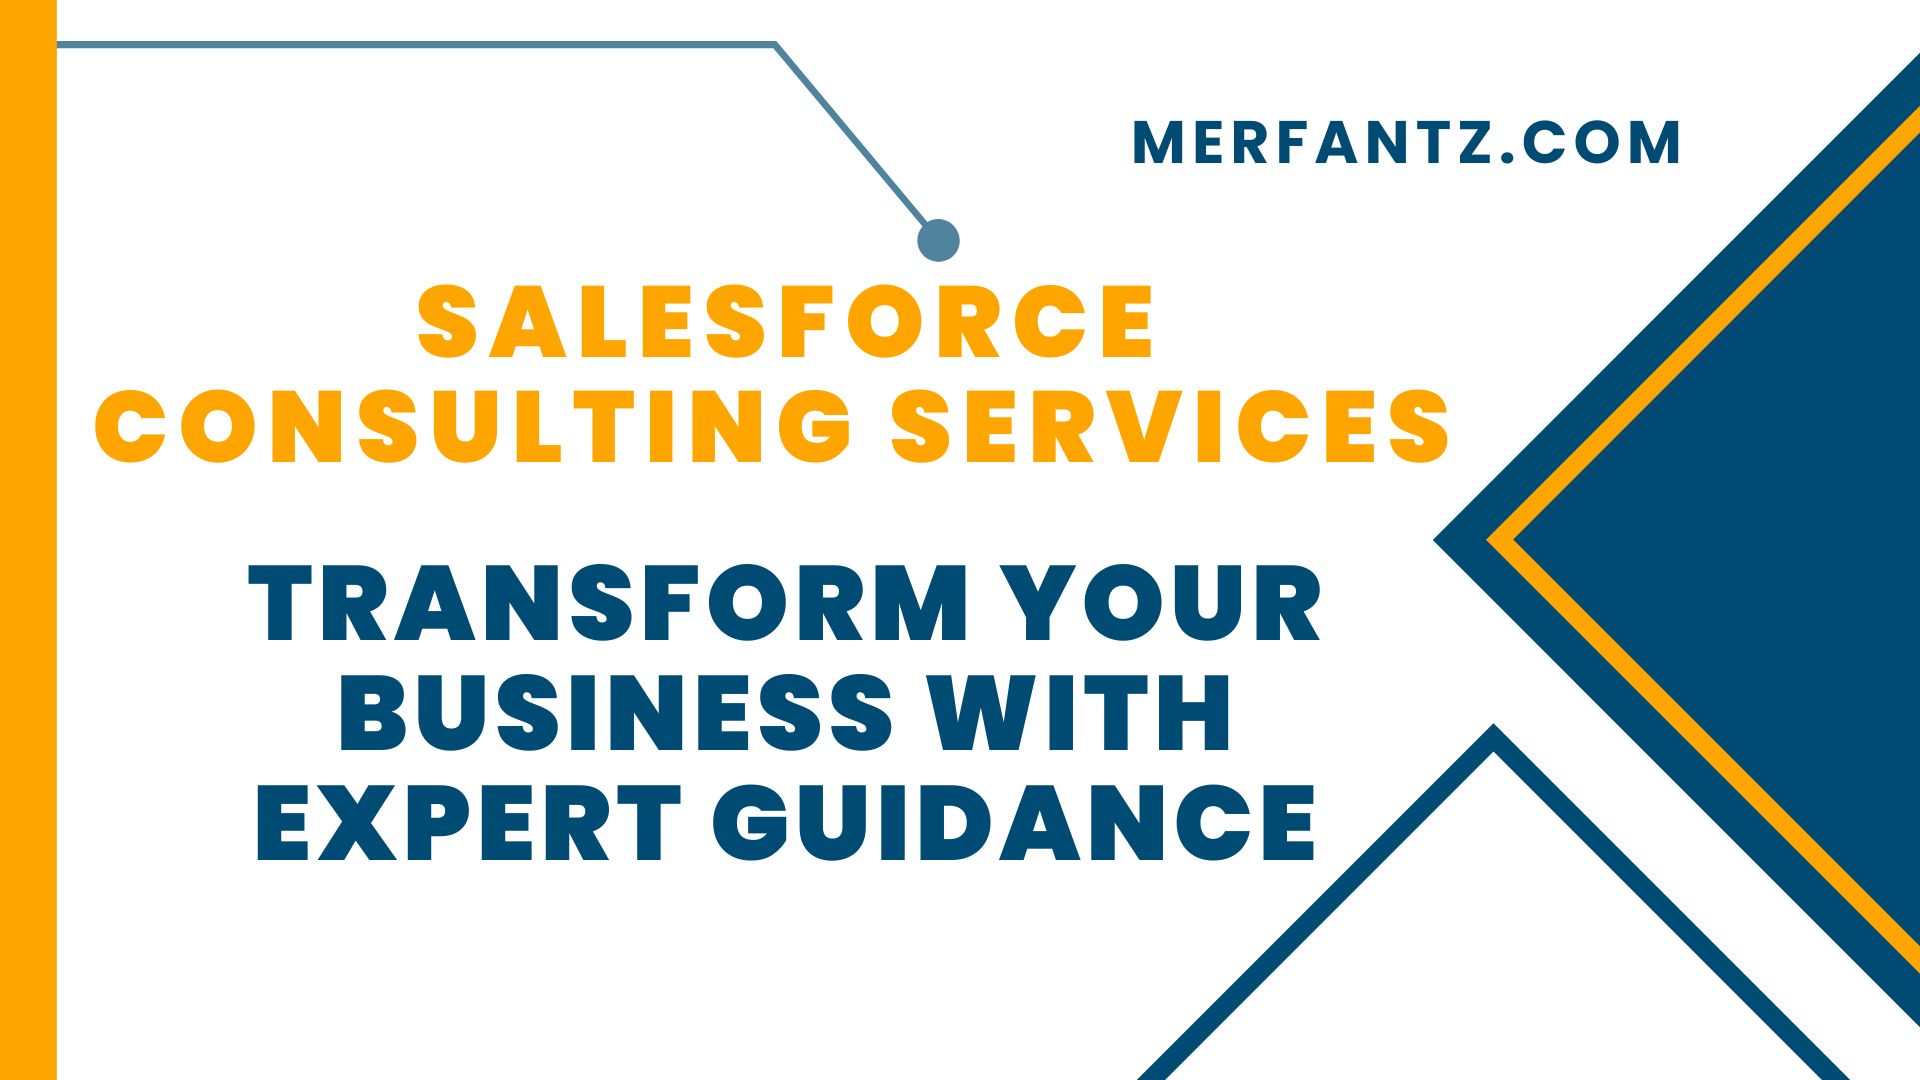 Salesforce Consulting Services Transform Your Business with Expert Guidance